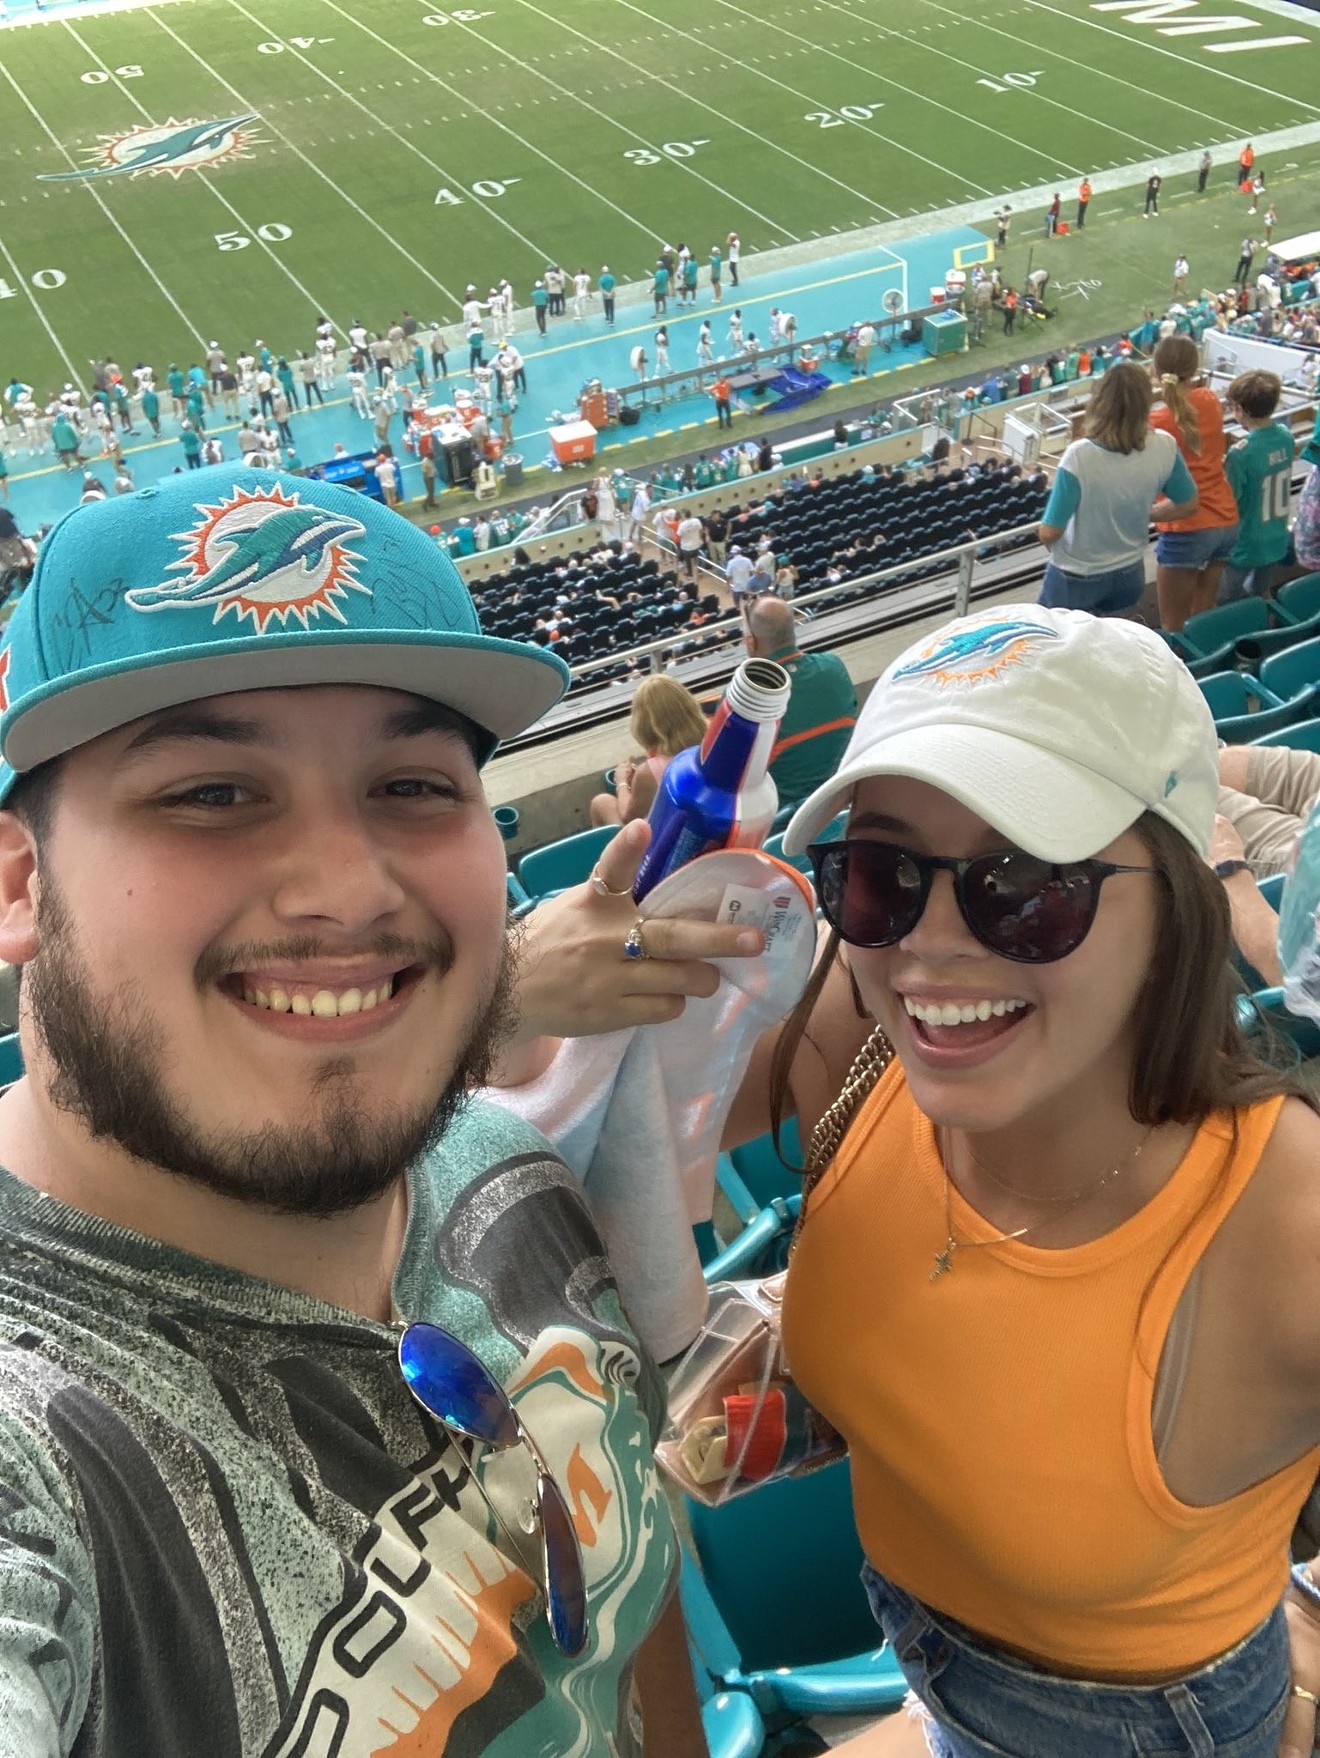 Omar Sicle is on a journey to find the infamous Dolphins girl from section 347.